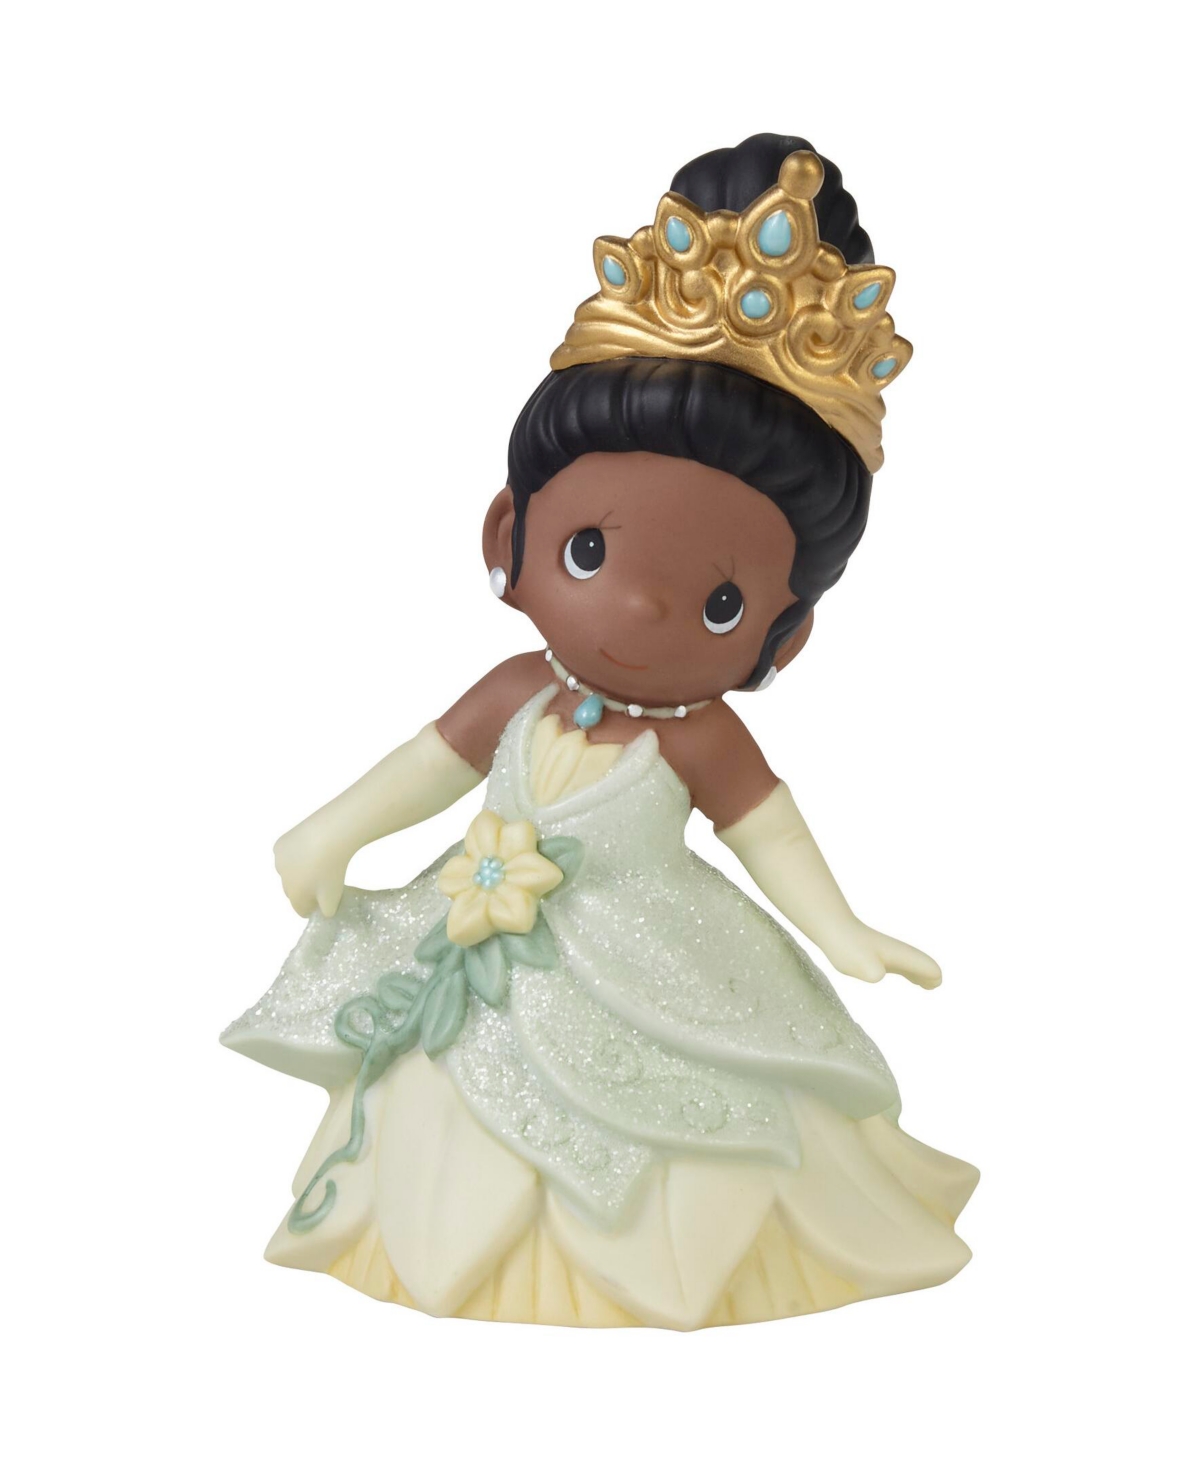 Precious Moments Happily Ever After Disney Tiana Bisque Porcelain Figurine In Multicolored